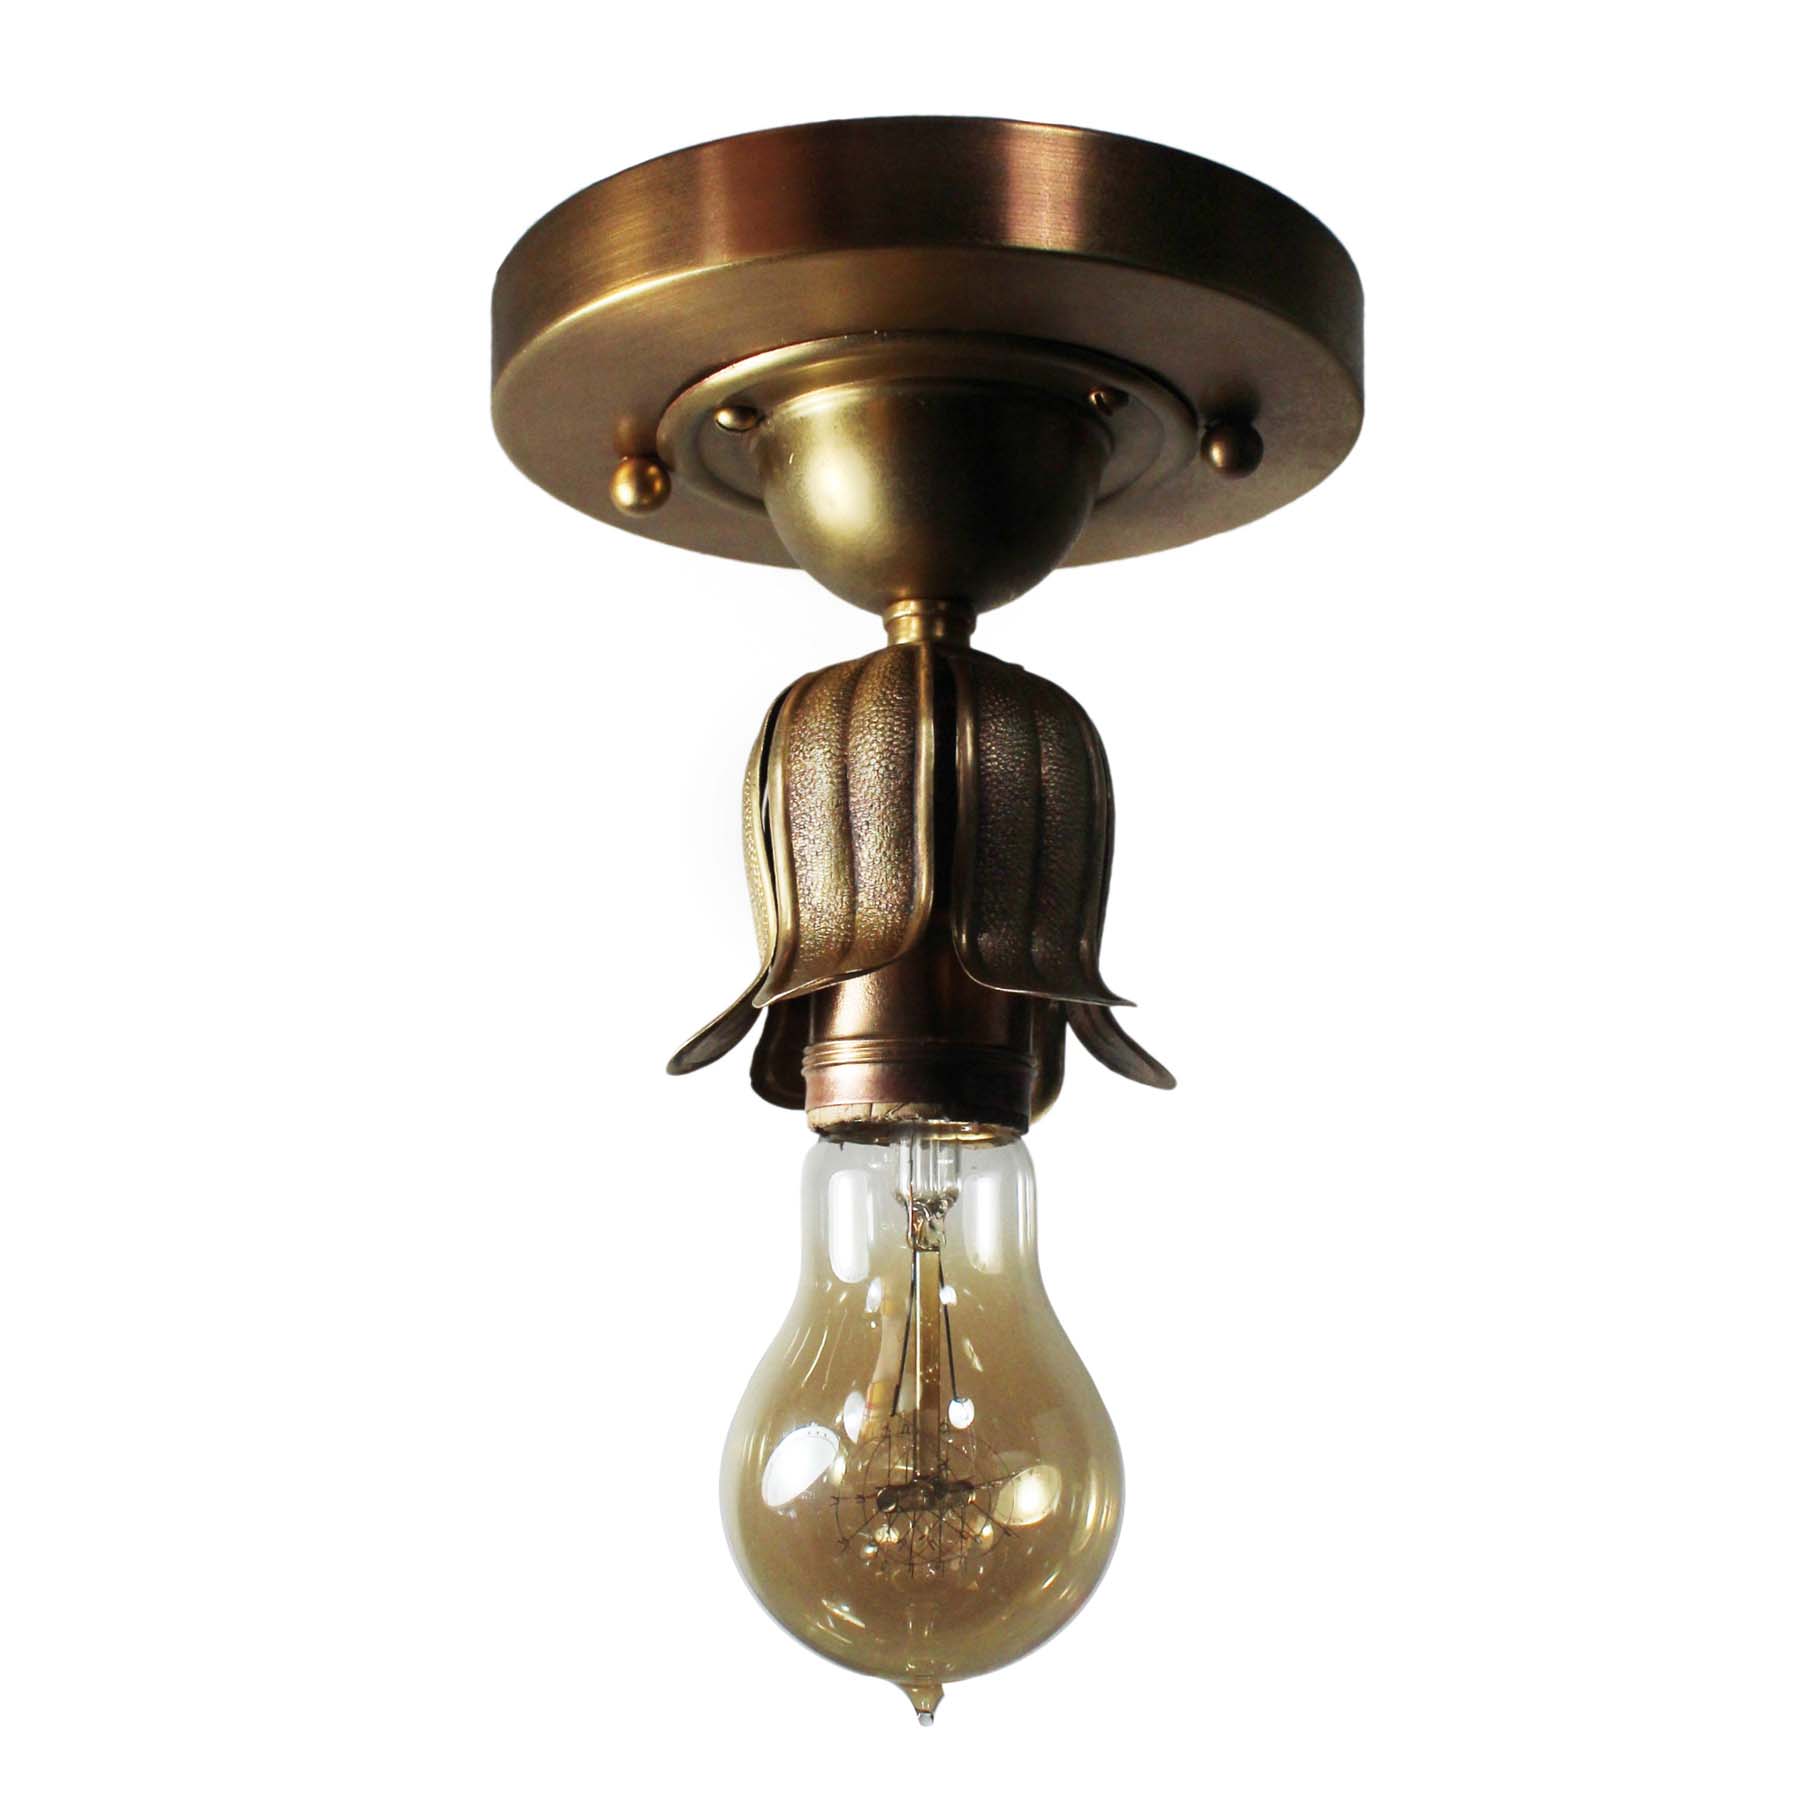 SOLD Brass Flush-Mount Lights with Exposed Bulbs, Antique Lighting-70024